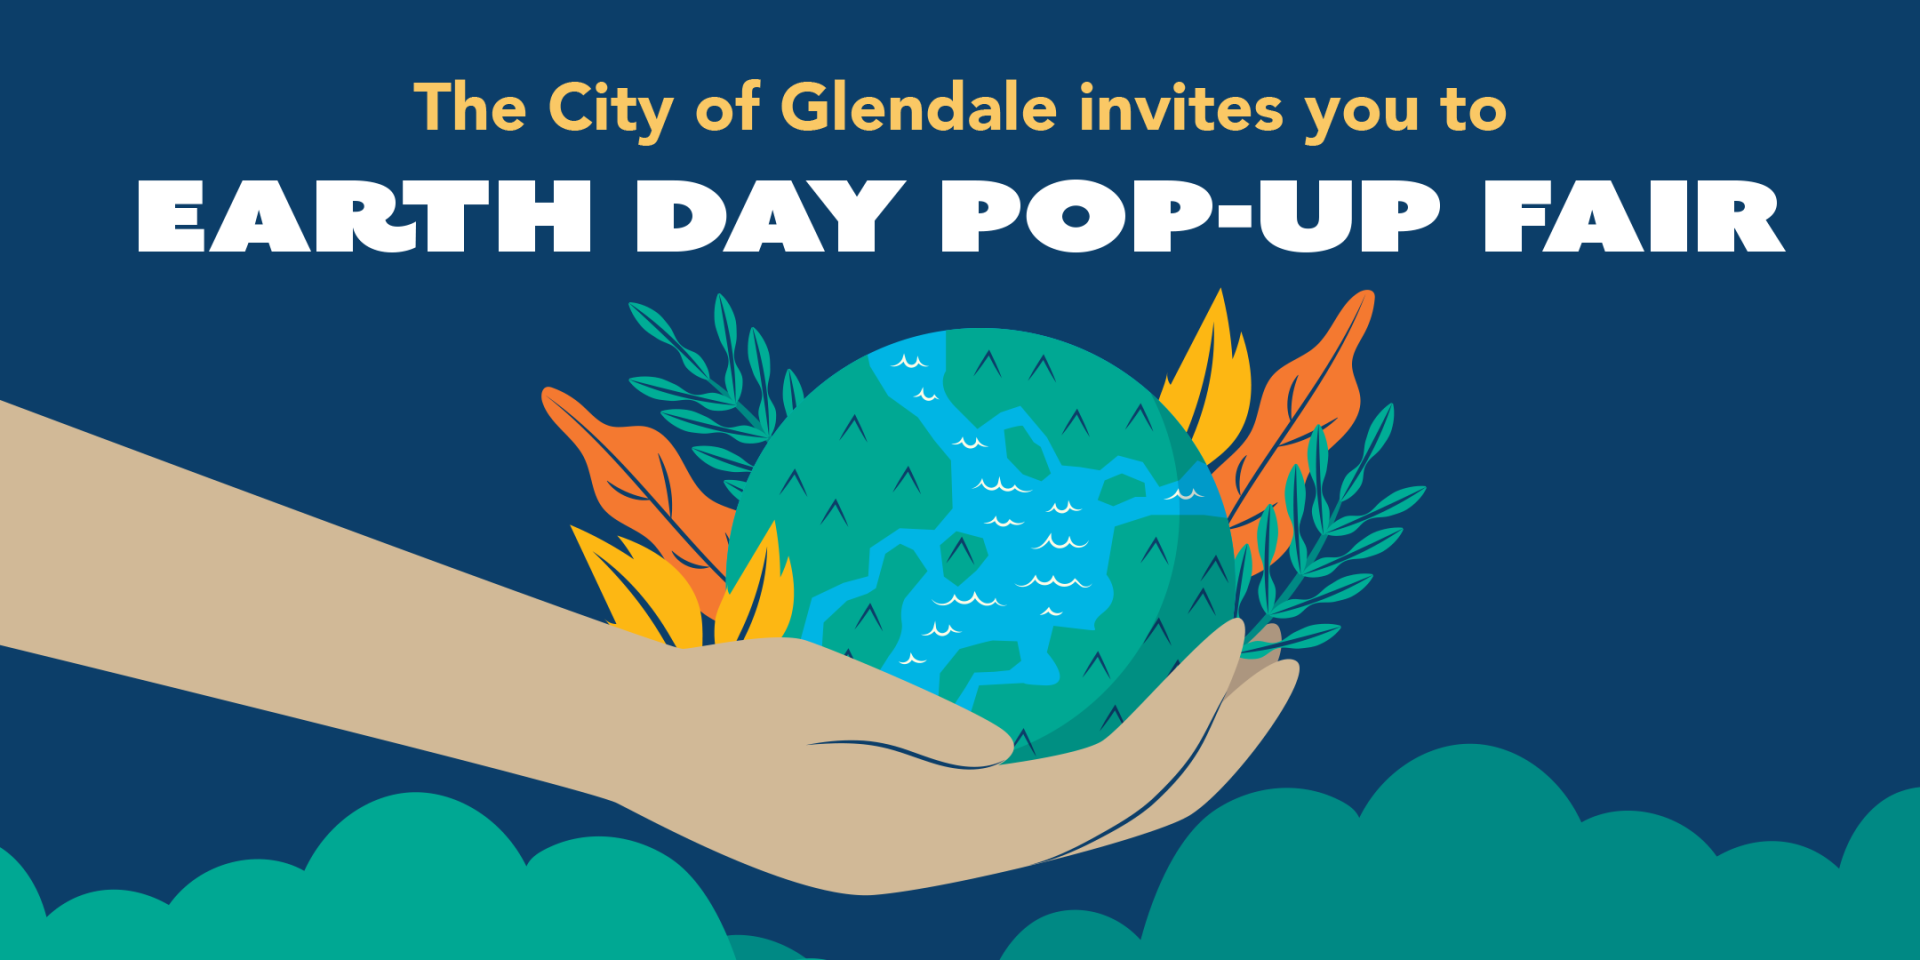 Earth Day Pop-up Fair 2022 on April 23rd at the Artsakh Paseo in the City of Glendale